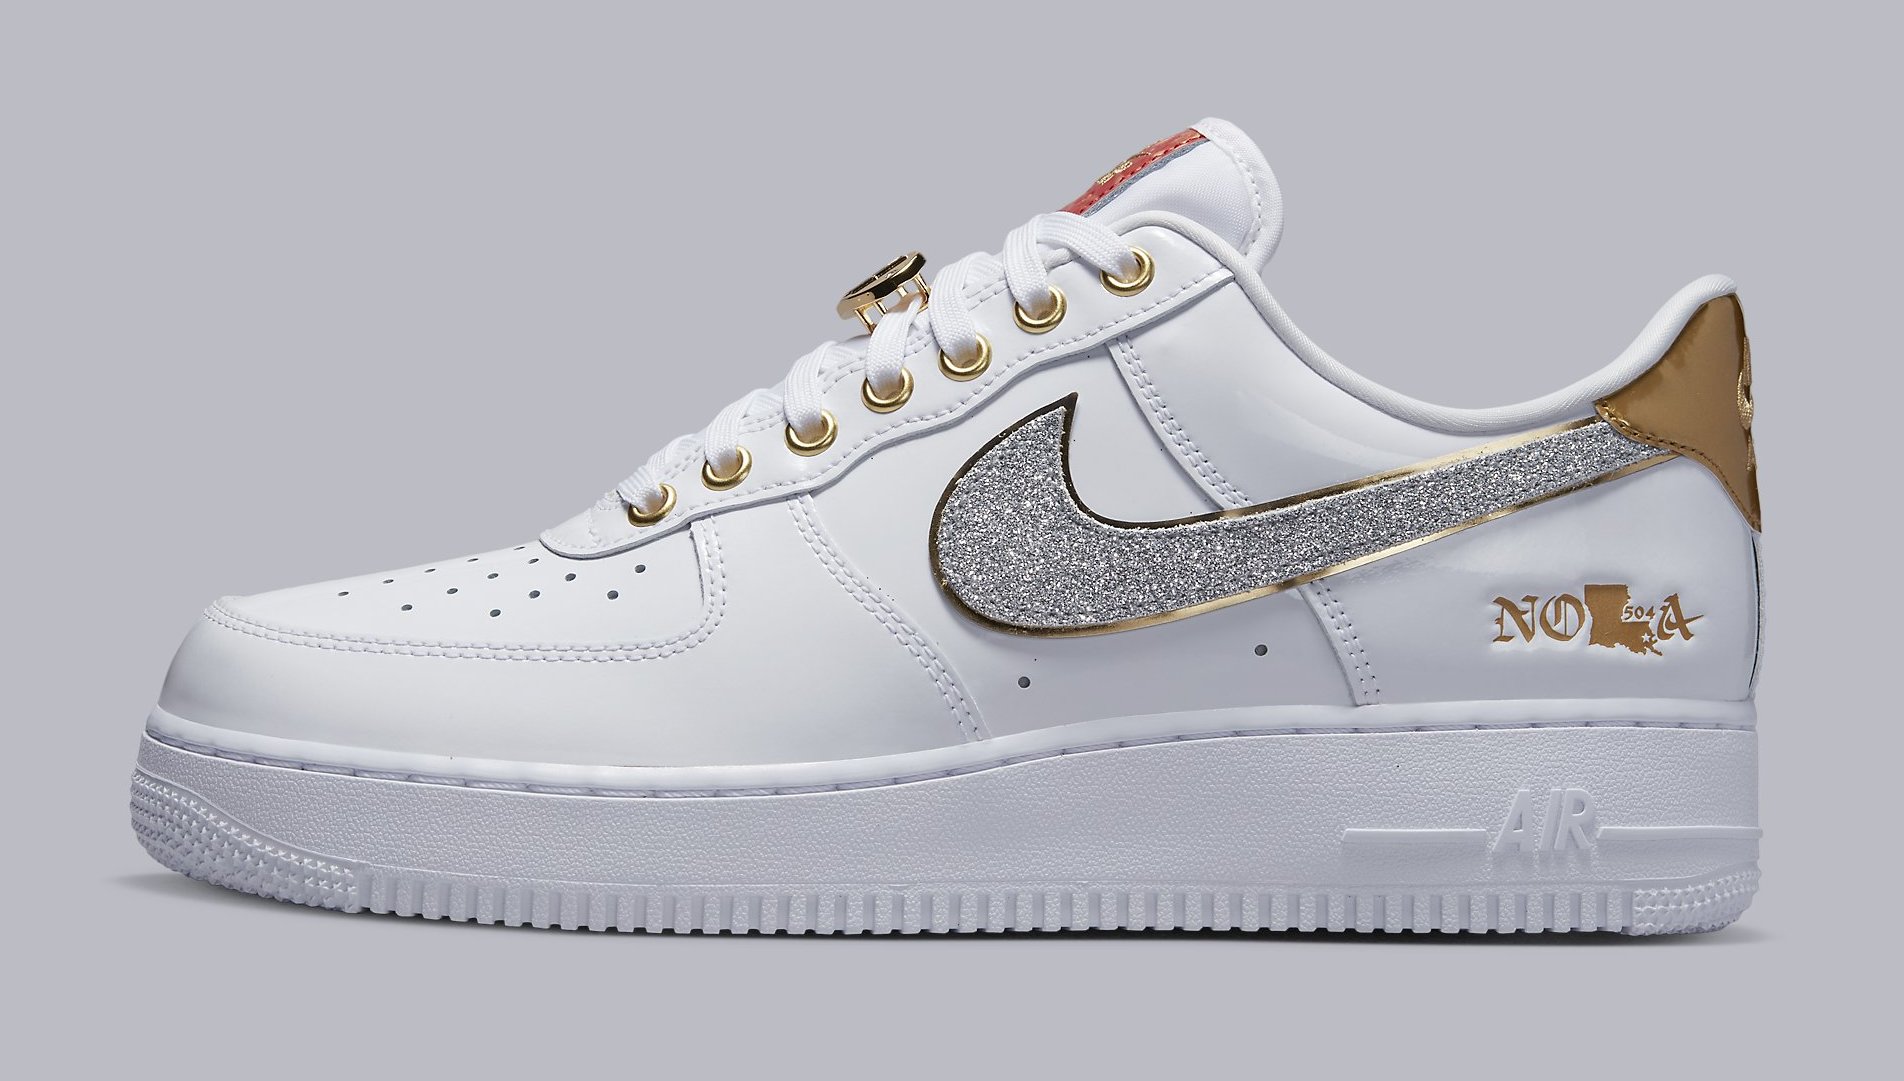 Nike Air Force 1 Low &#x27;Nola&#x27; DZ5425 100 Lateral